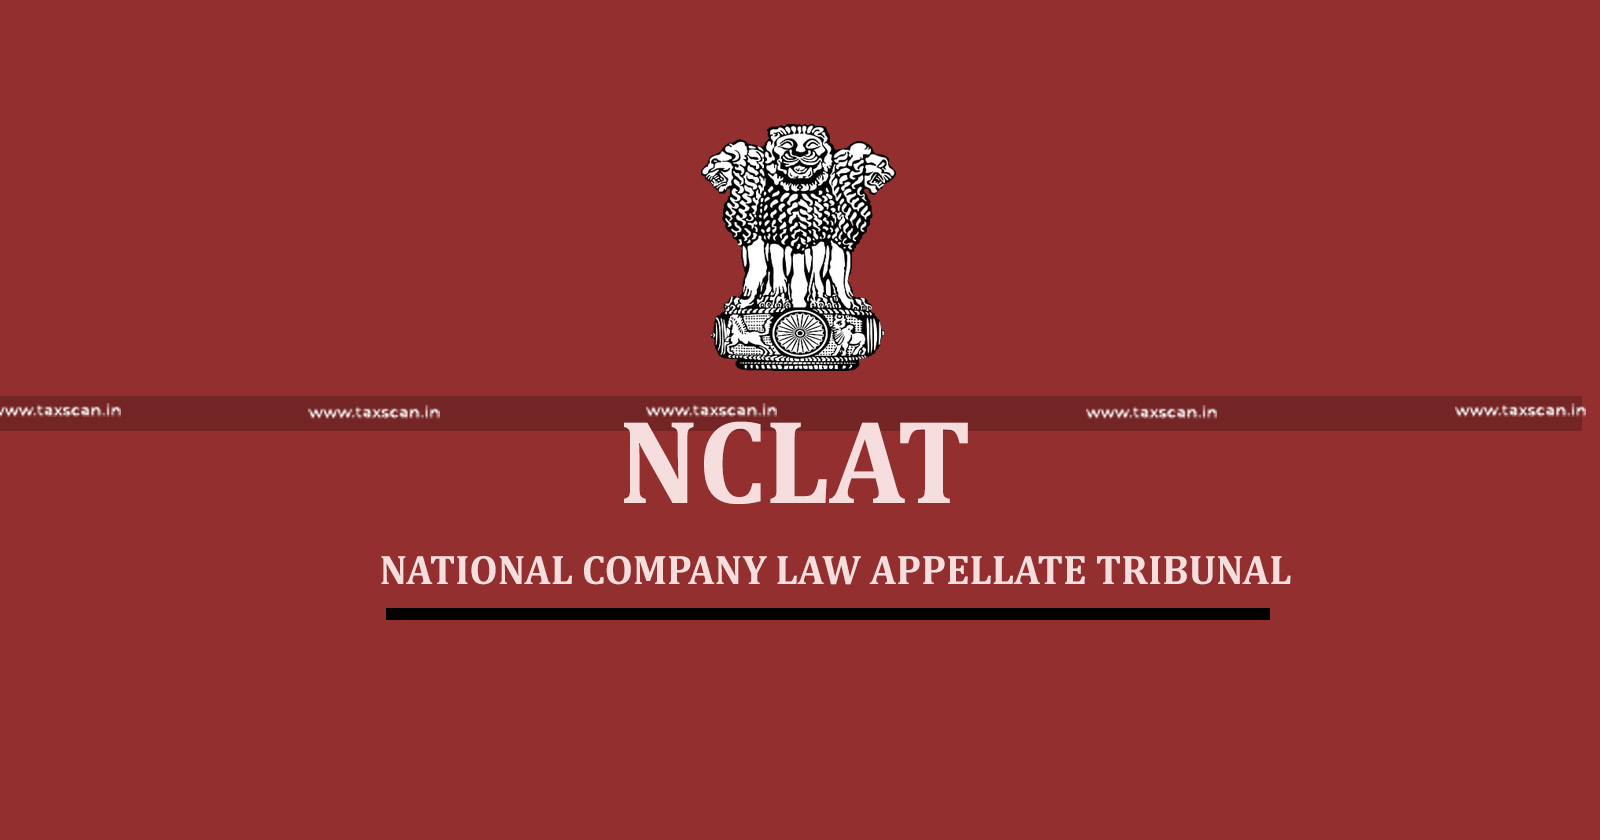 Email does not amount to Notice - NCLT Rules - NCLAT directs to File Application - Notice - NCLT - Recalling Order - taxscan